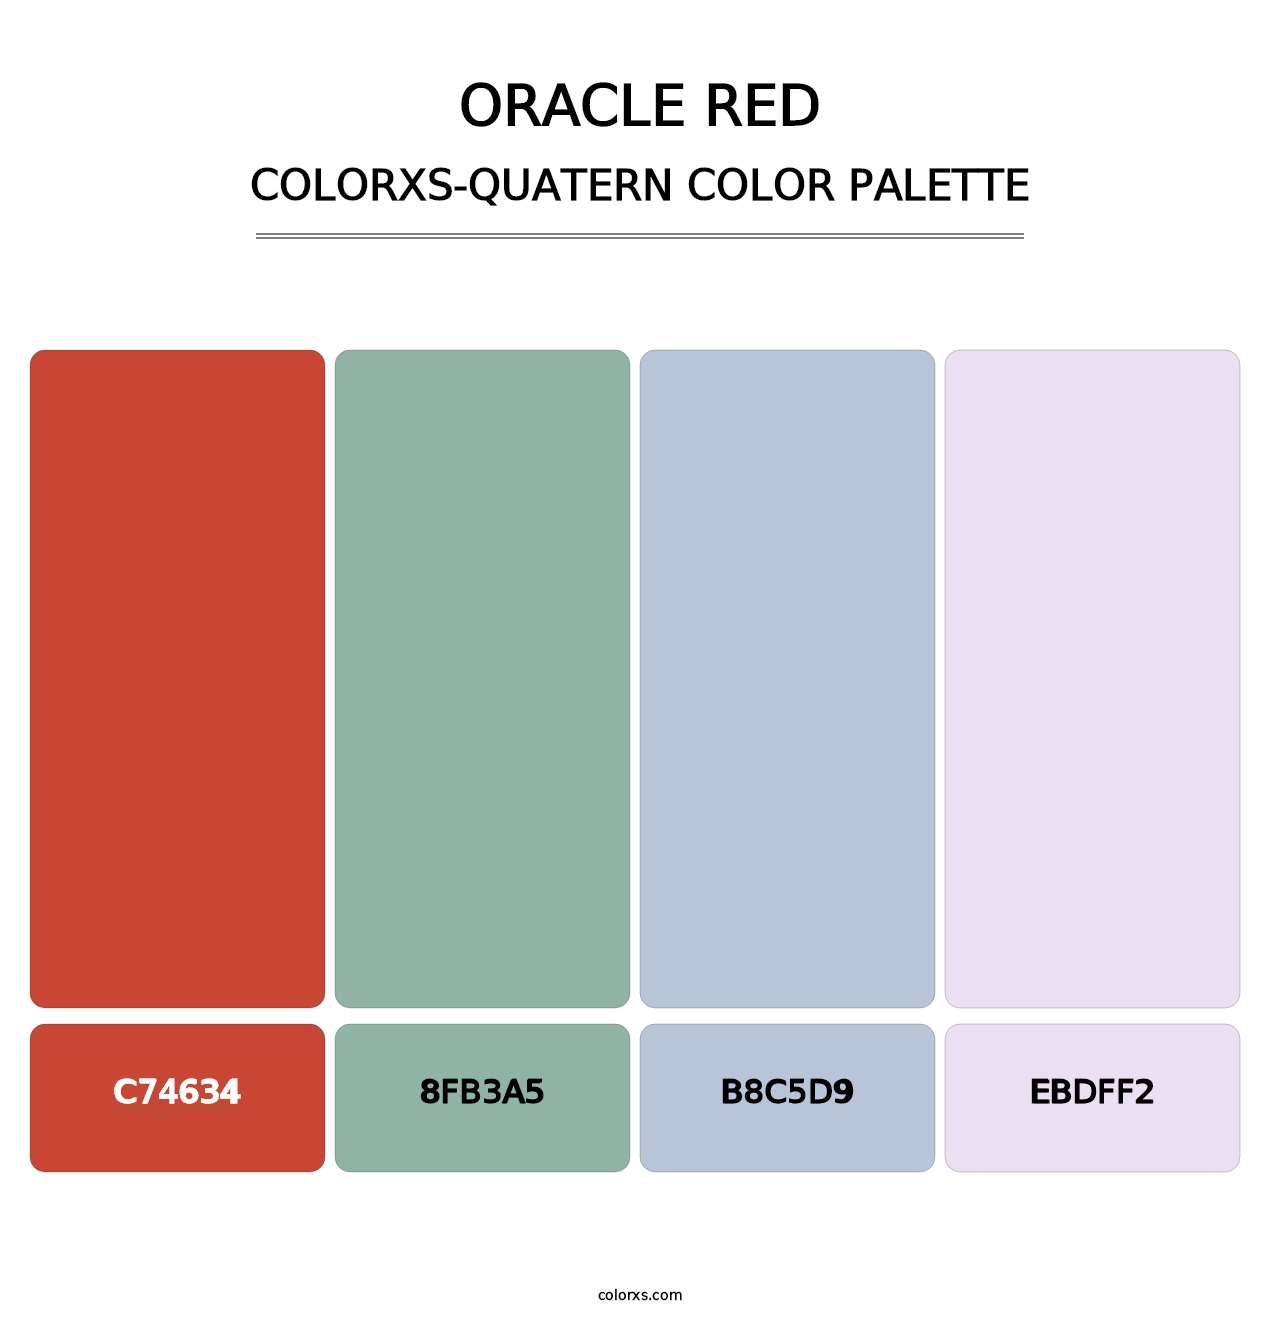 Oracle Red - Colorxs Quatern Palette